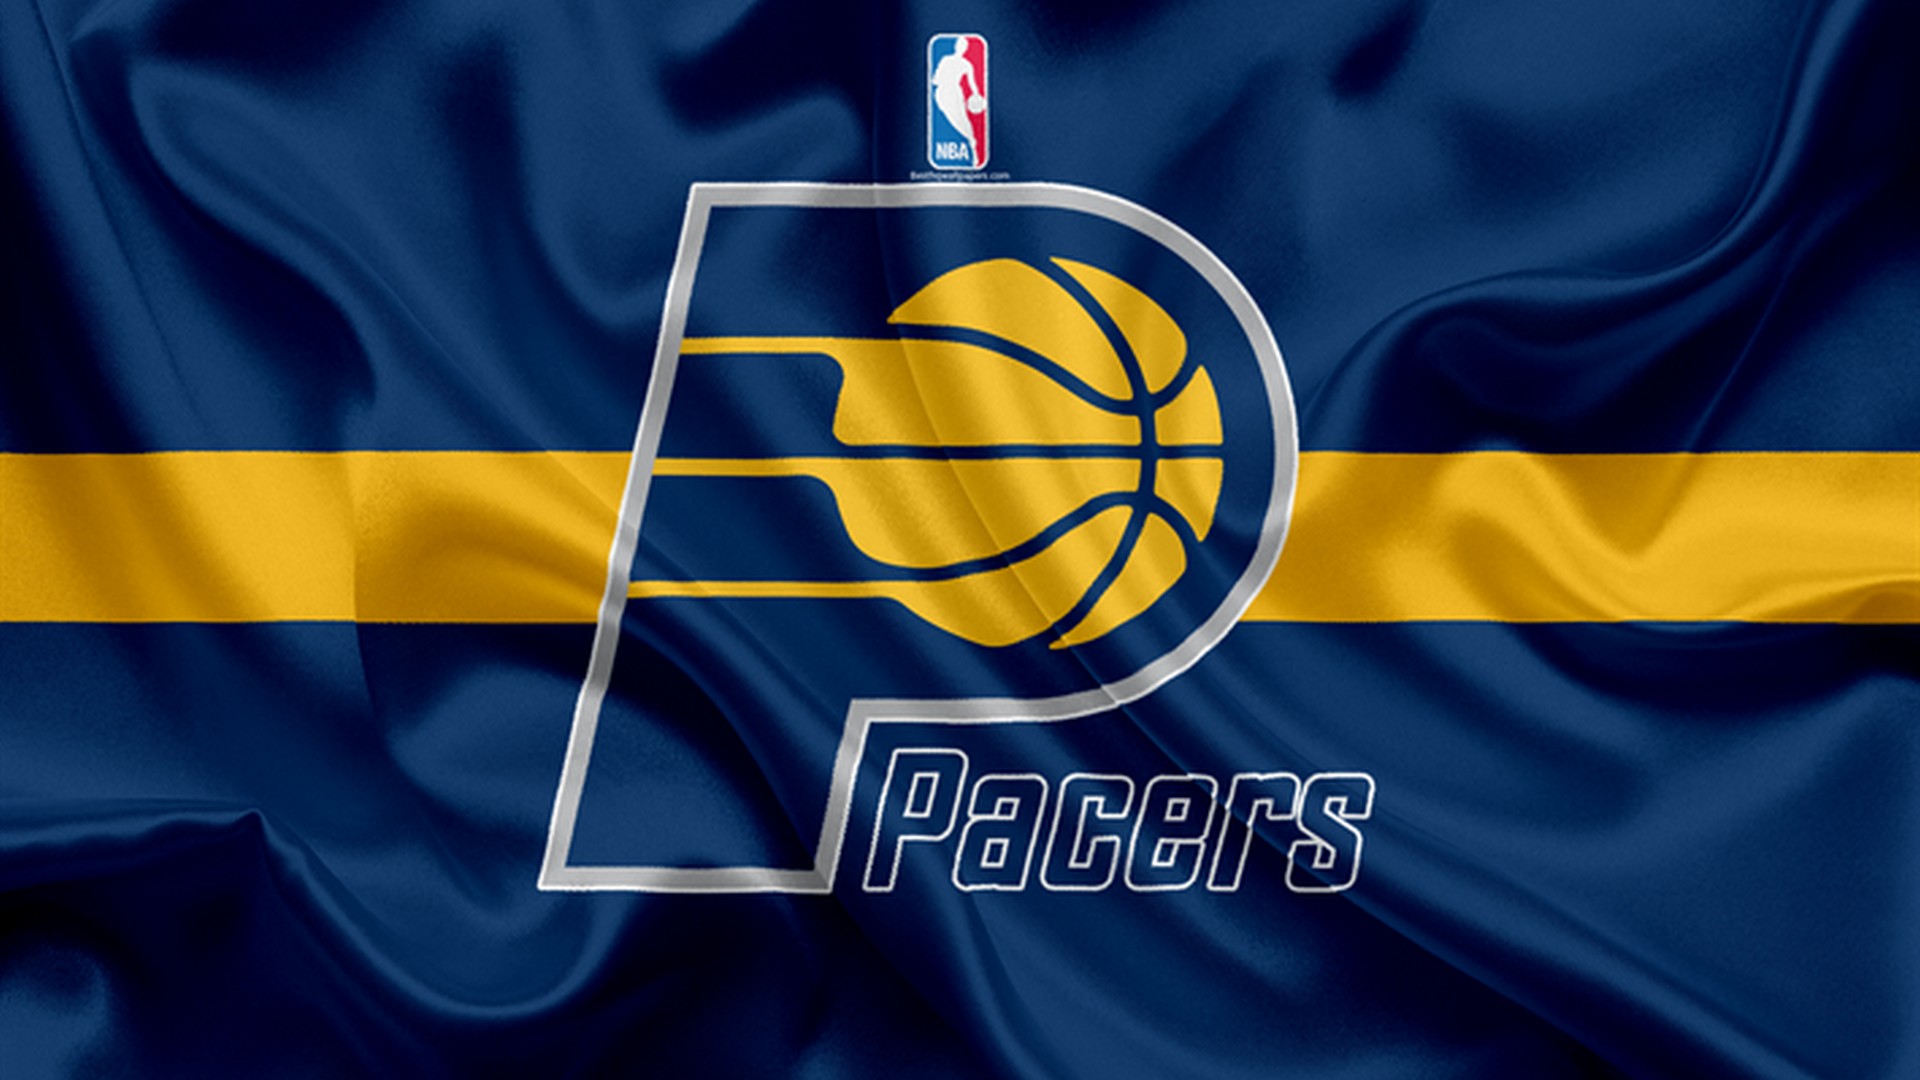 Wallpapers HD Indiana Pacers with high-resolution 1920x1080 pixel. You can use this wallpaper for your Desktop Computer Backgrounds, Windows or Mac Screensavers, iPhone Lock screen, Tablet or Android and another Mobile Phone device